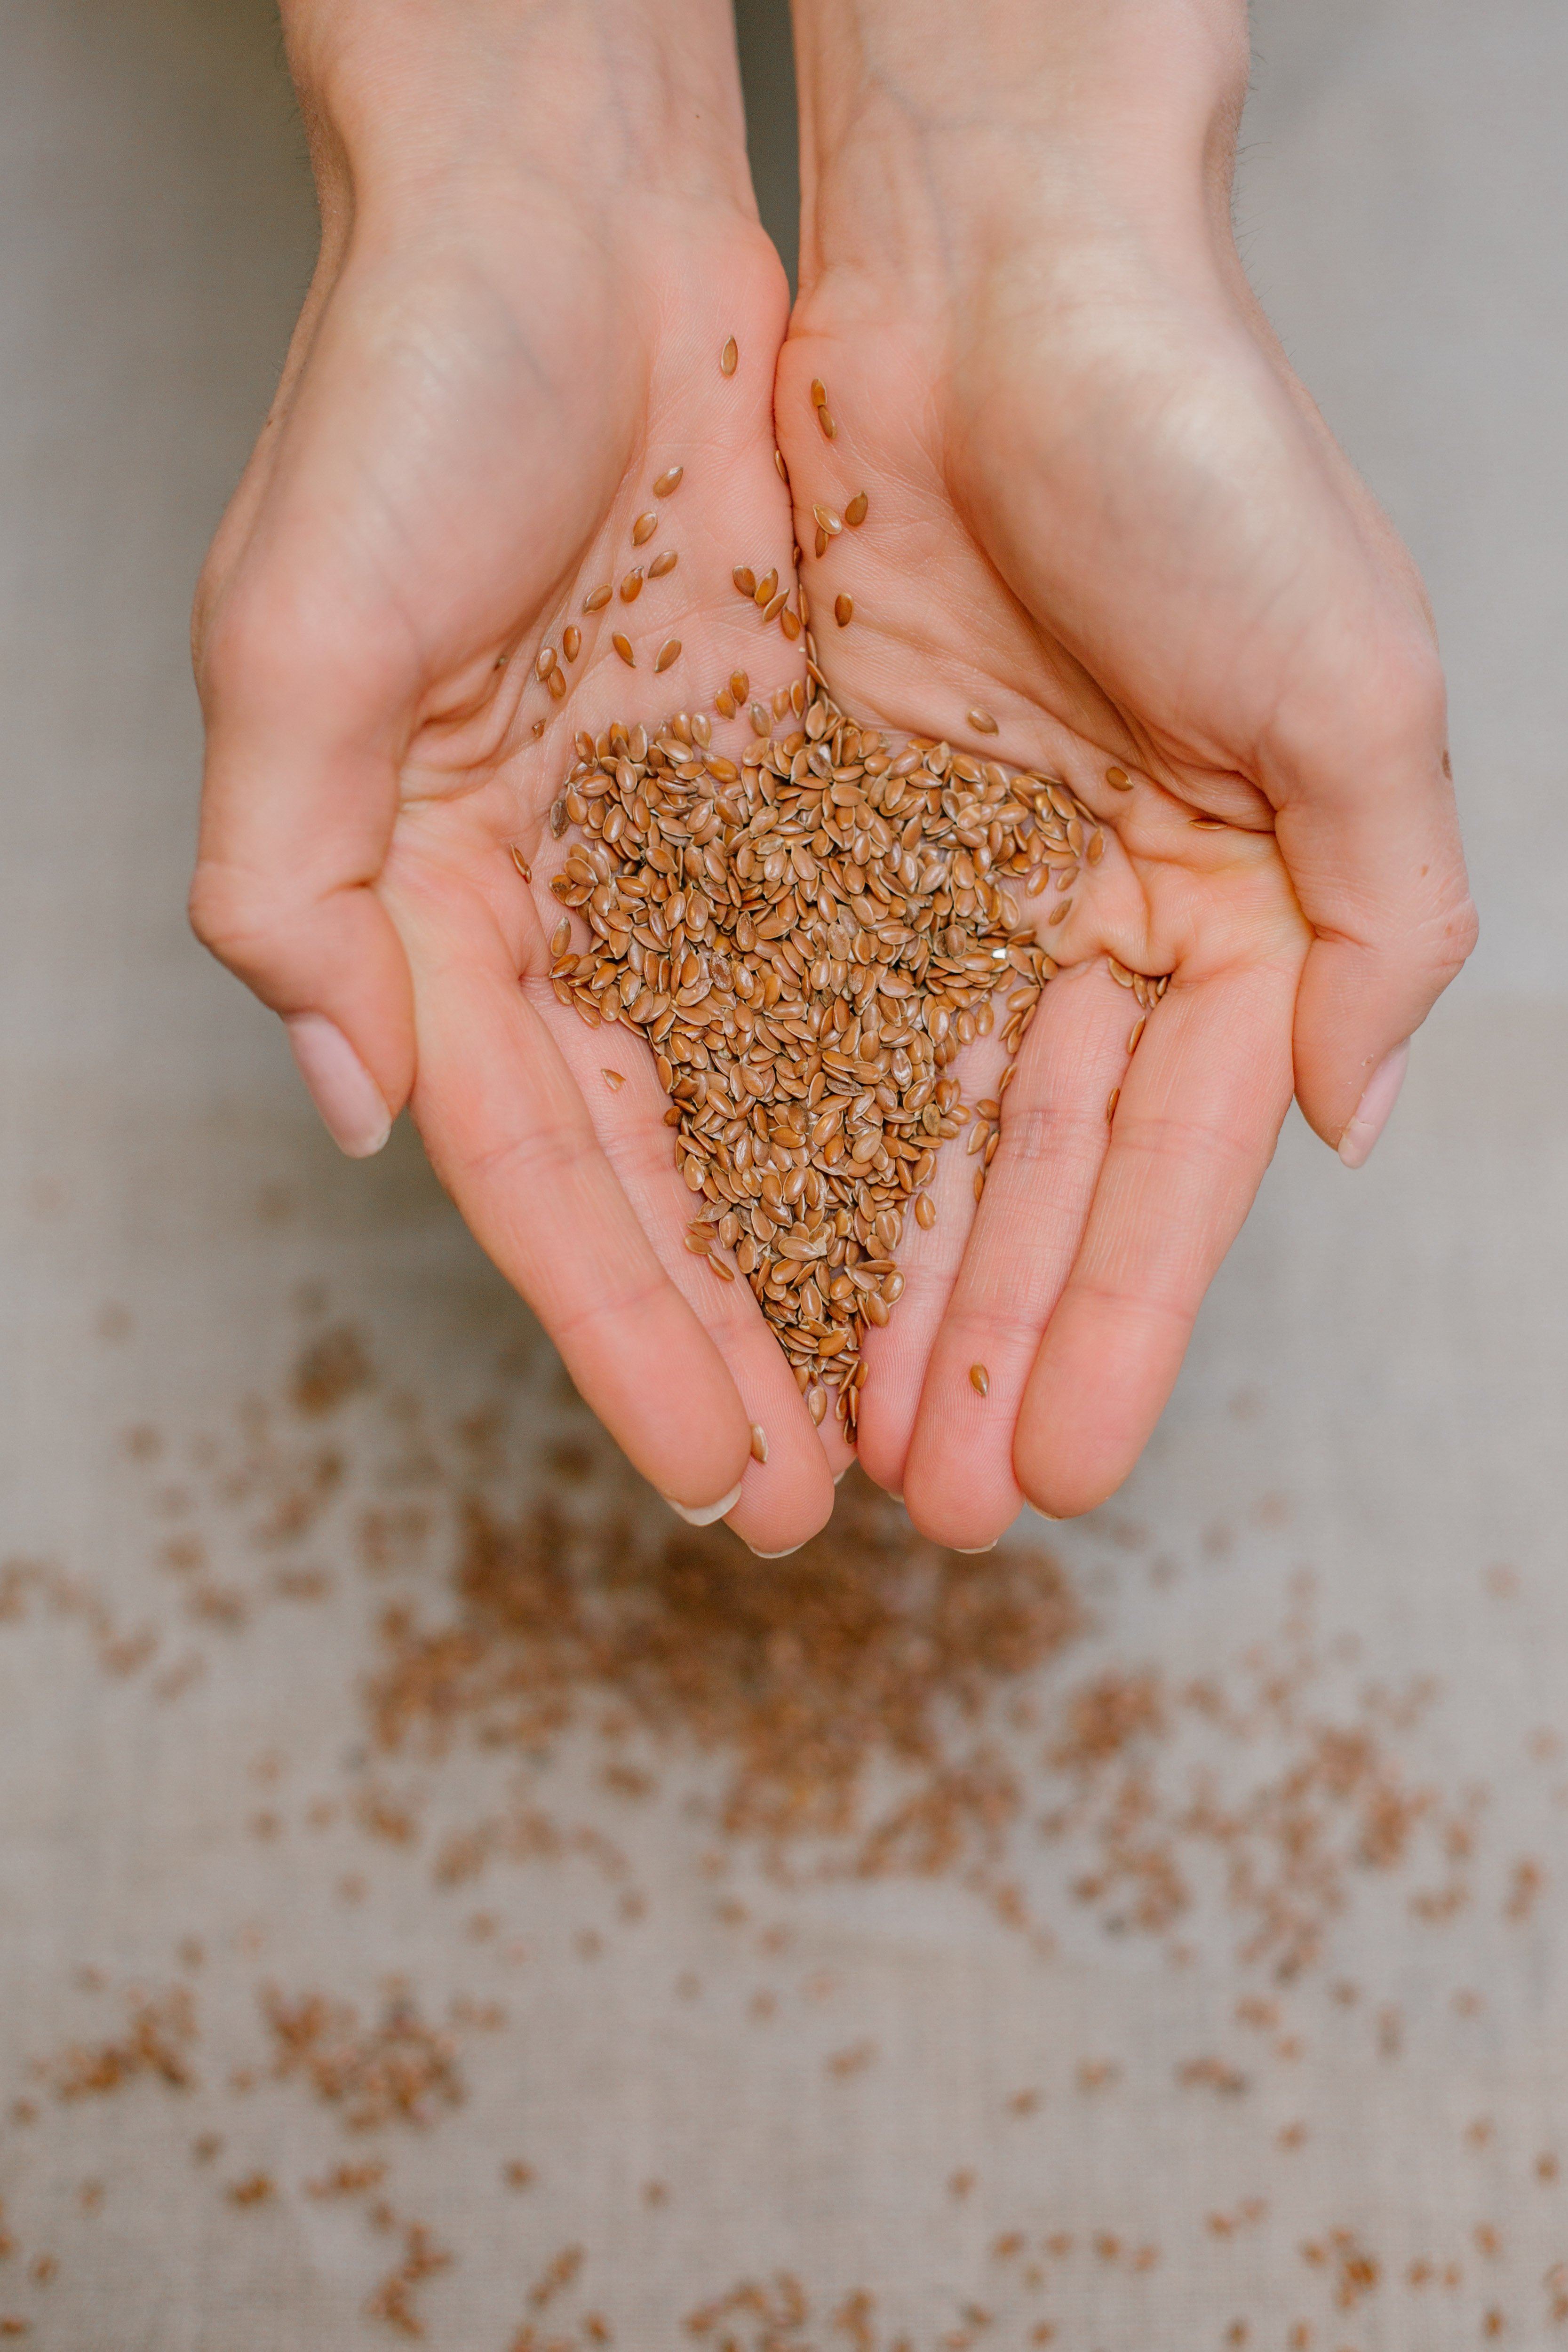 Health Benefits of Flax Seeds that are backed up by science